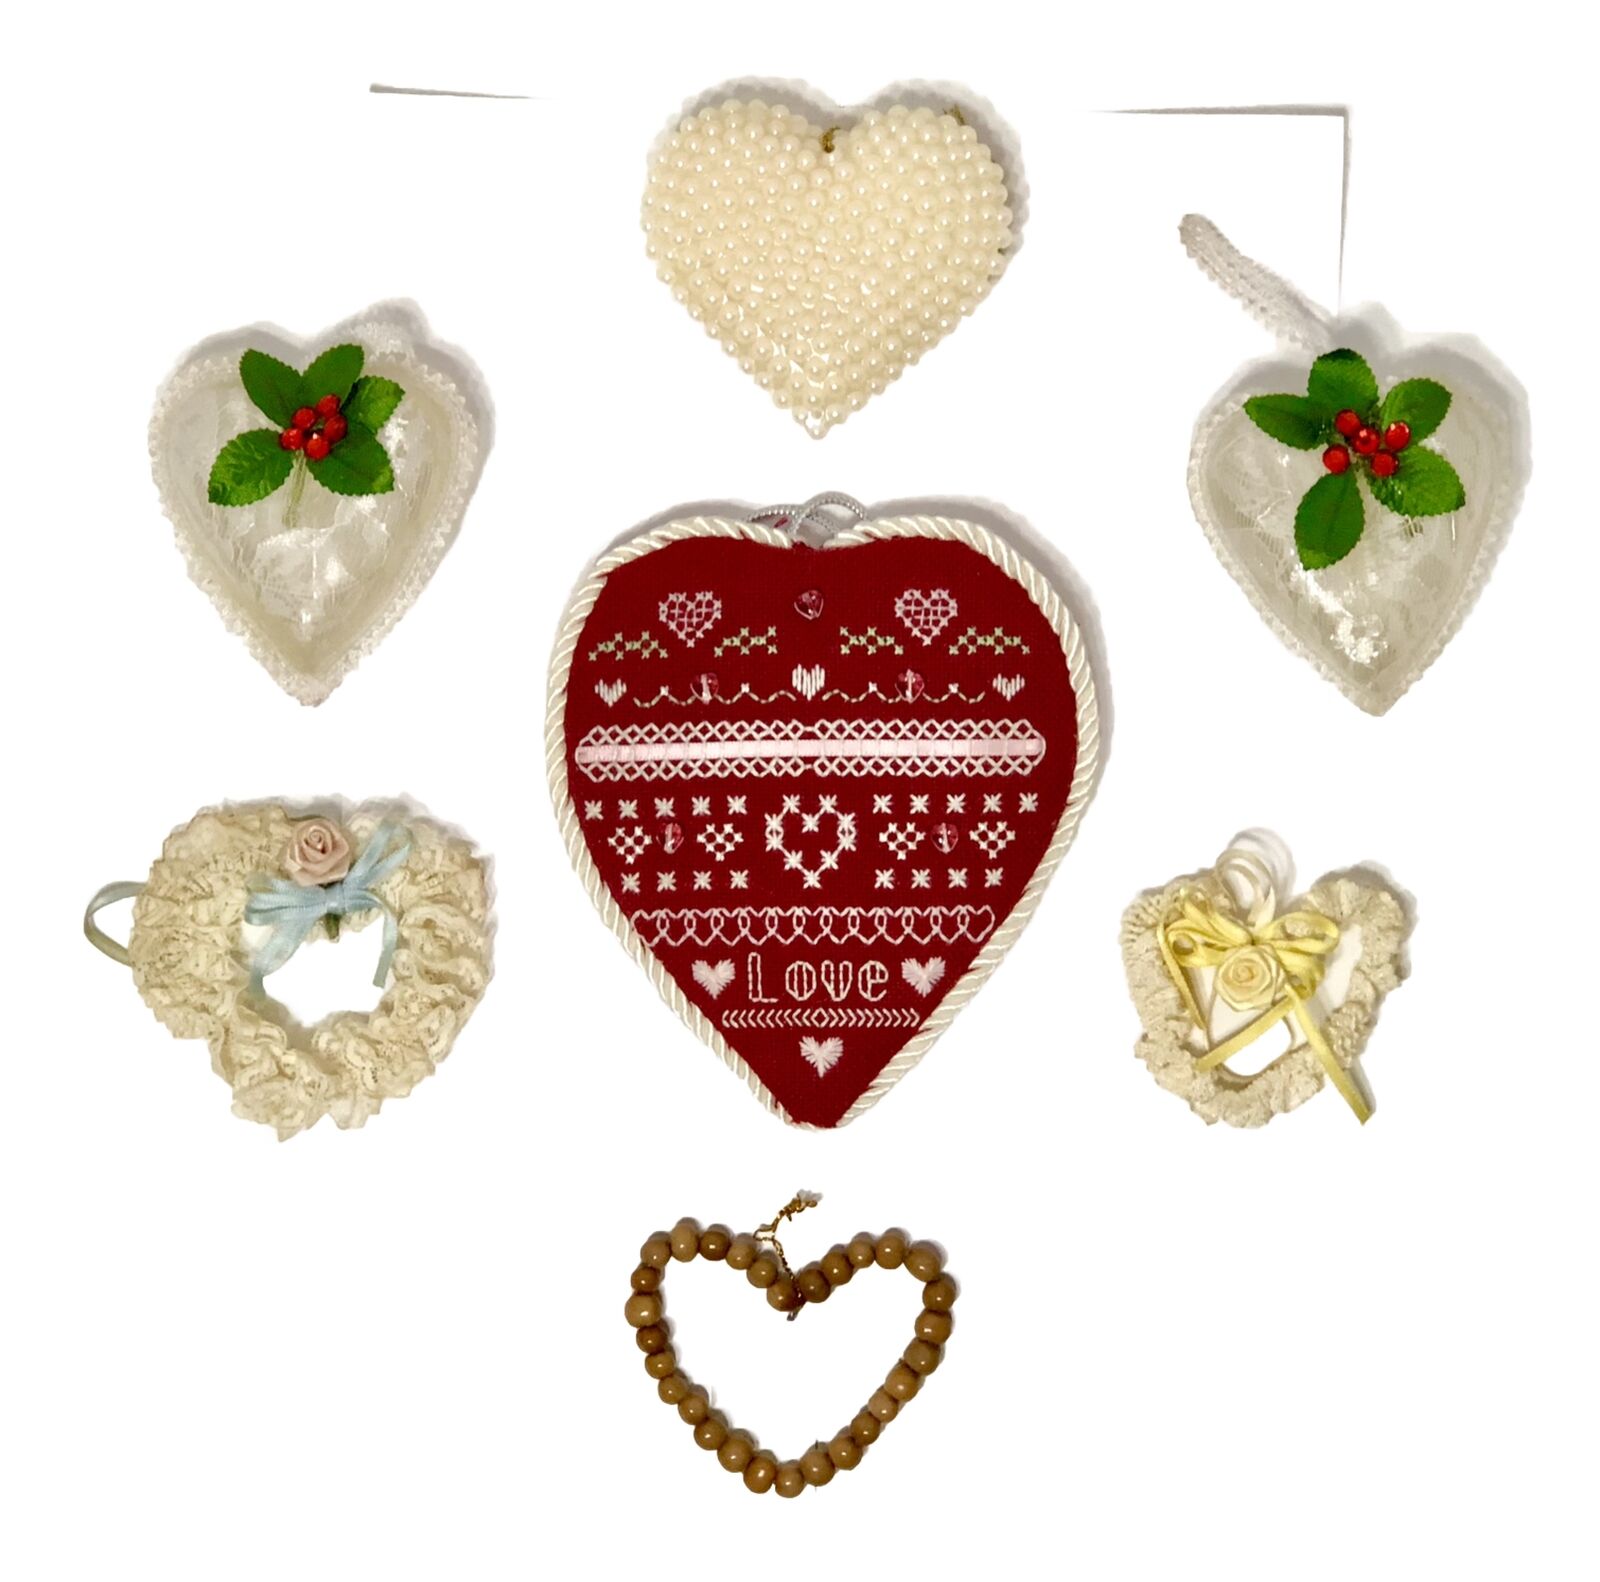 Lot/7 Vintage Handmade Heart Shaped Ornaments Beads Lace Ribbon Valentines Day